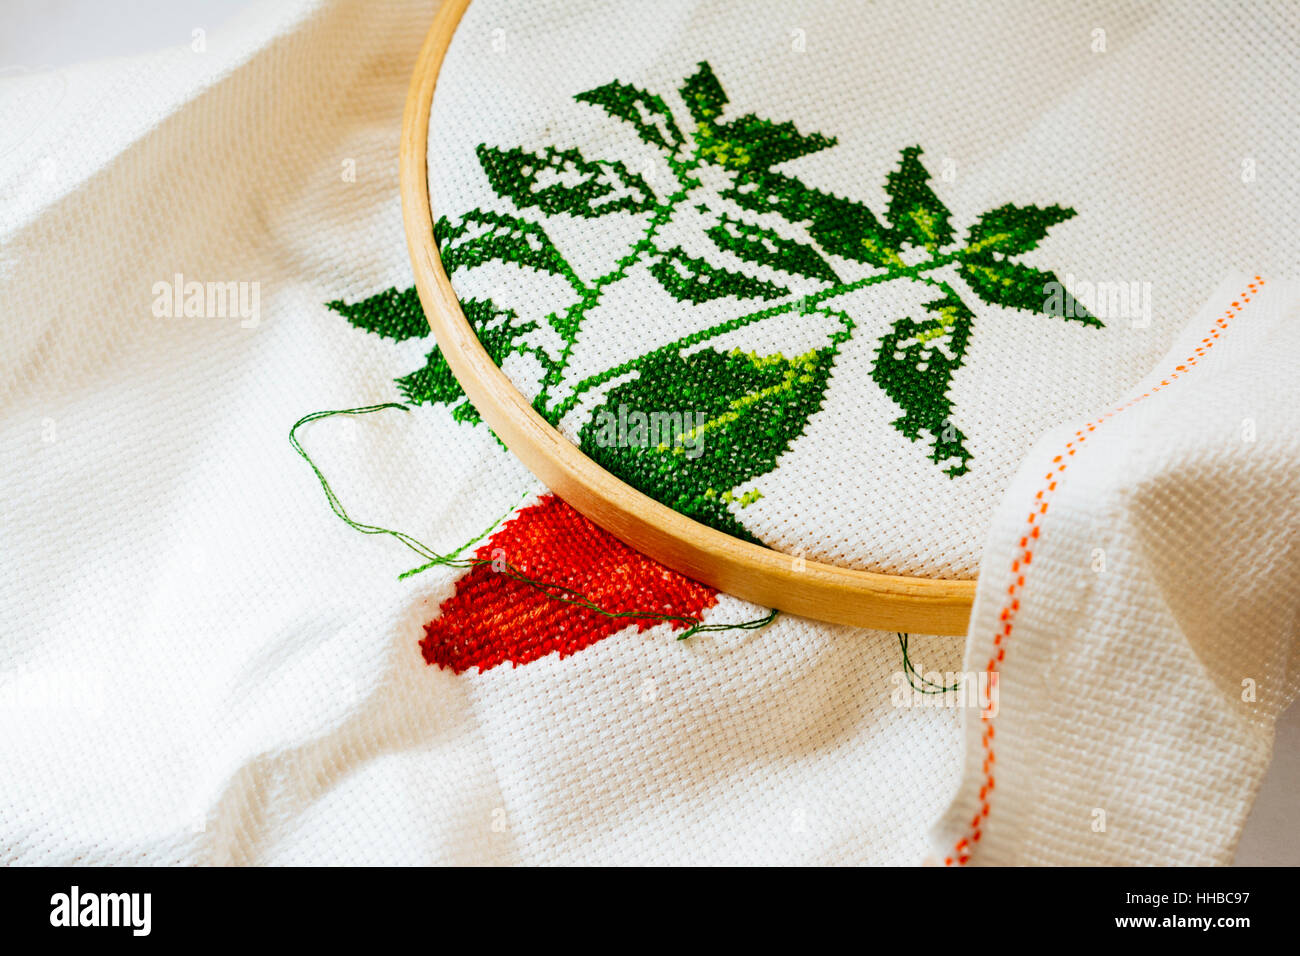 Cross-stitch is a popular form of counted-thread embroidery in which X-shaped stitches in a tiled, raster-like pattern are used to form a picture. Stock Photo